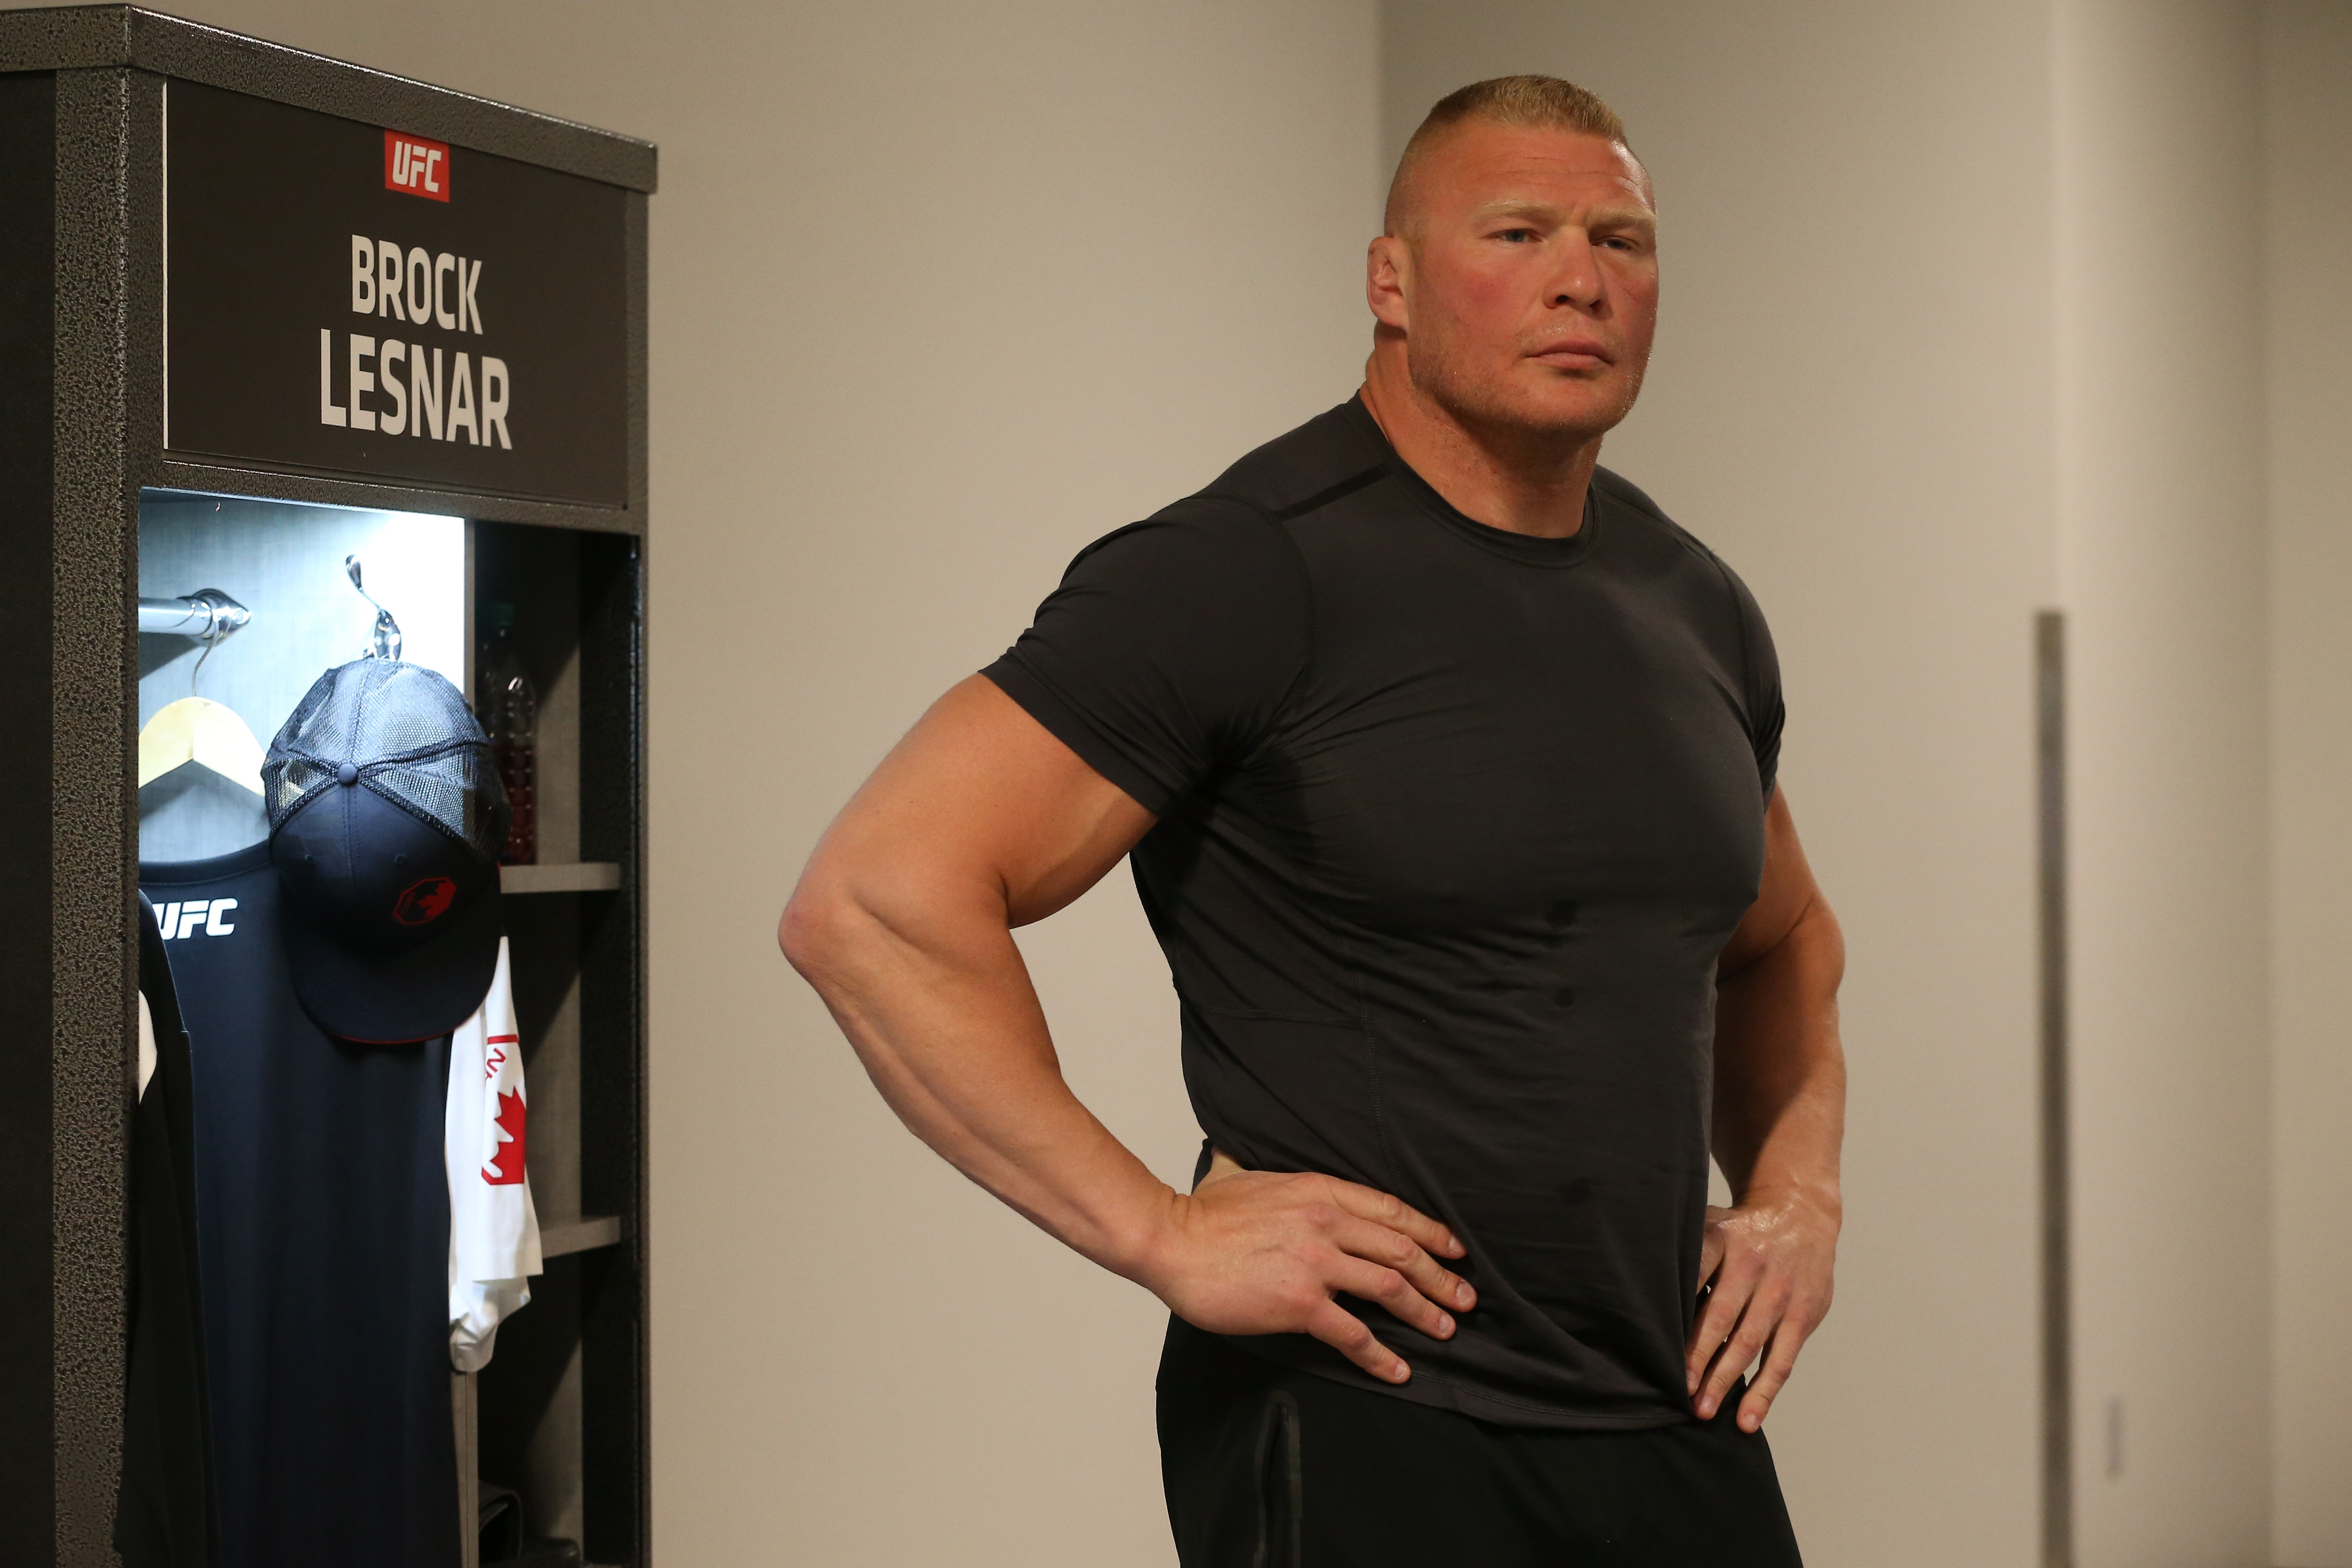 Brock Lesnar at the backstage of the UFC 200 event in  T-Mobile Arena on July 9, 2016, in Las Vegas, Nevada. | Source: Getty Images